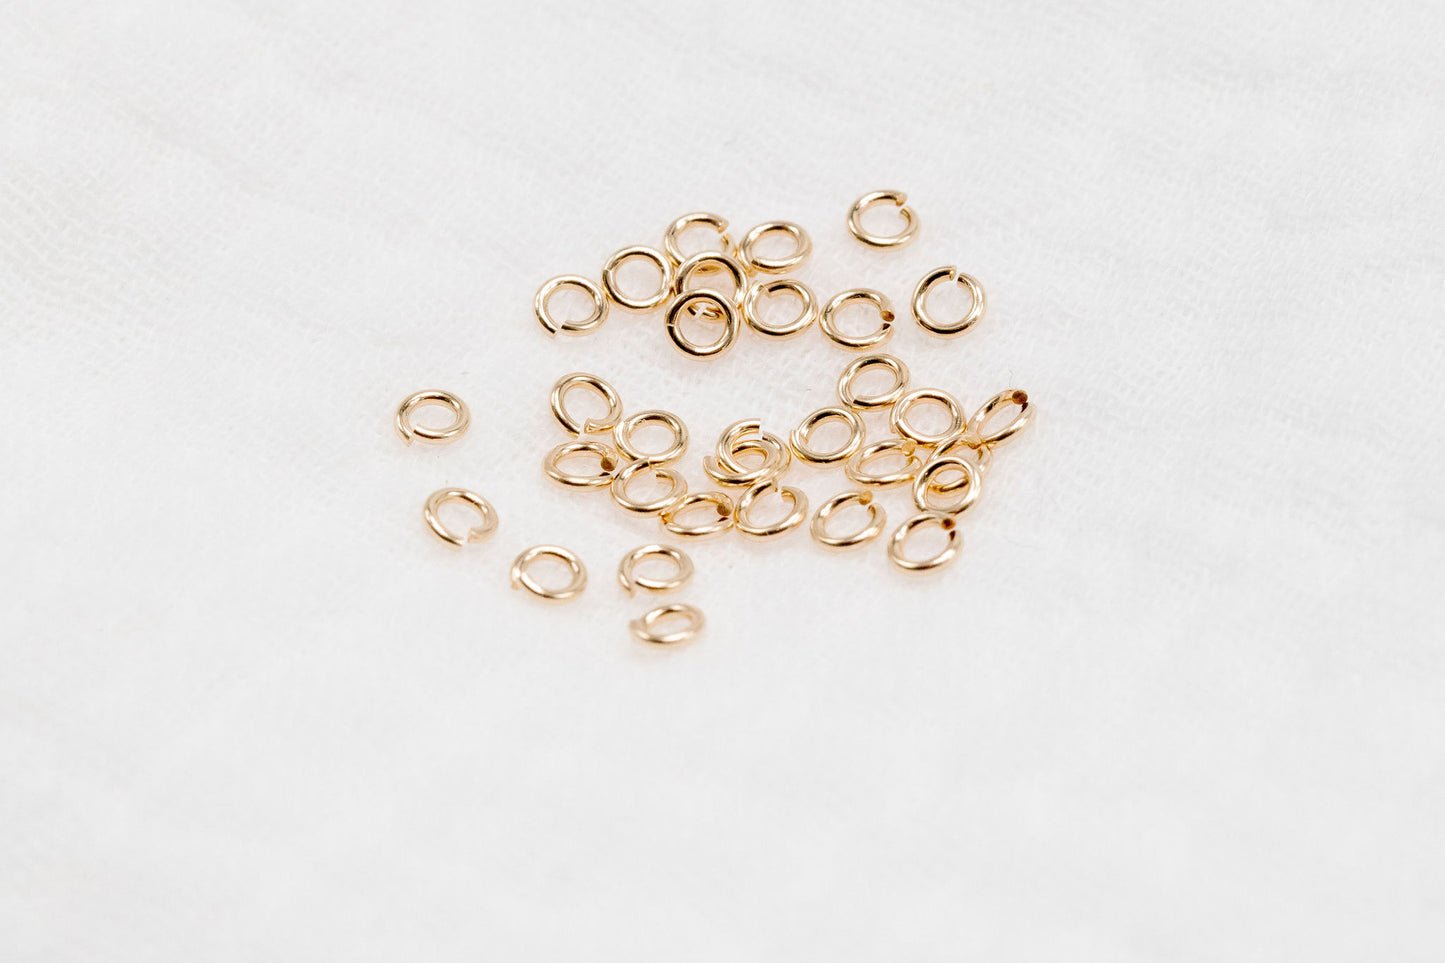 3mm 22g Gold Filled Open Jump Rings (50 Pack)